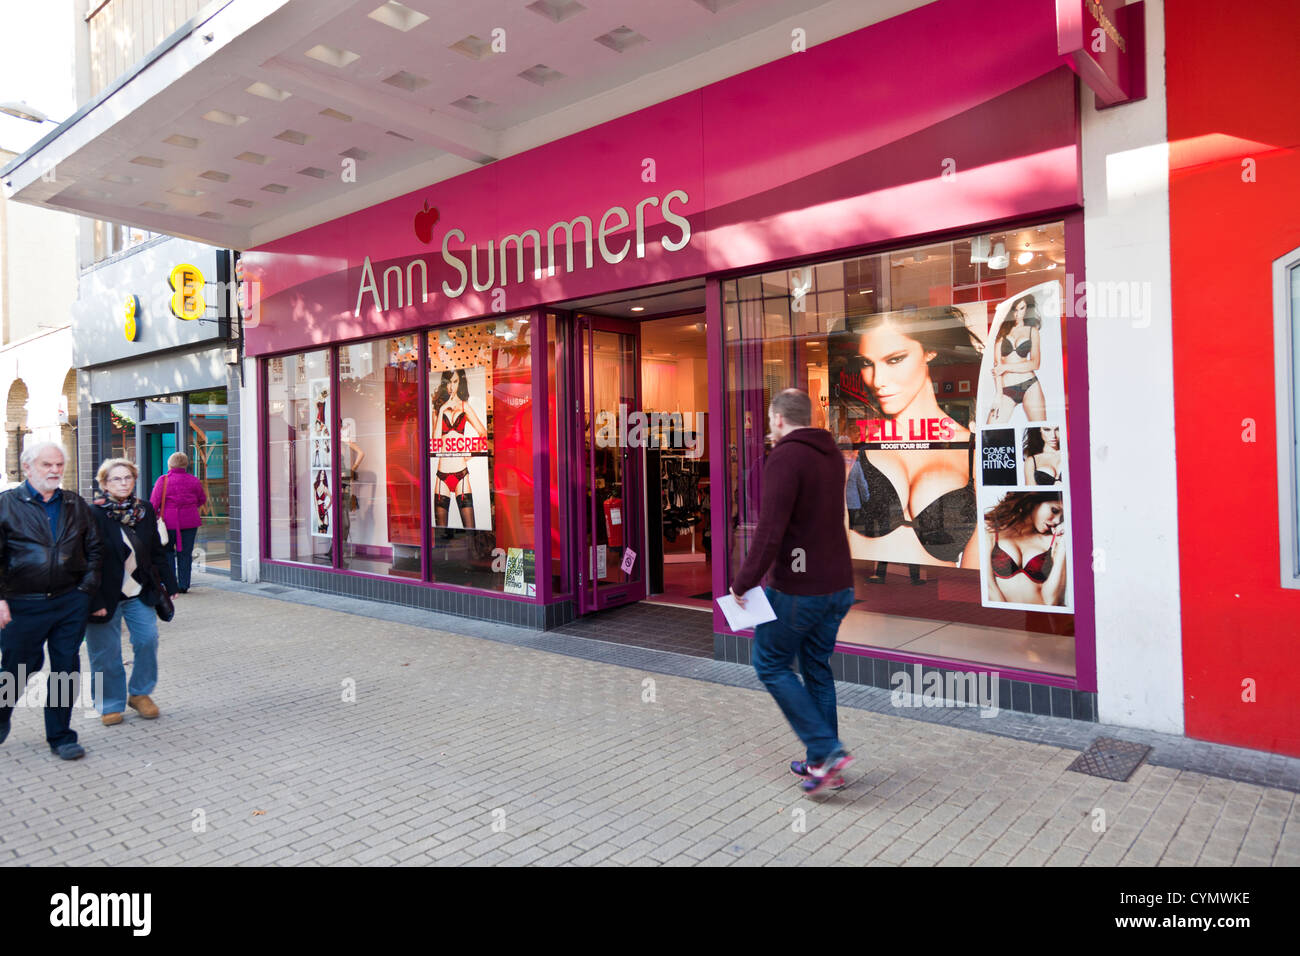 Ann Summers women sex shop selling naughty sexy underwear and sex toys, Broadmead Bristol England UK Stock Photo